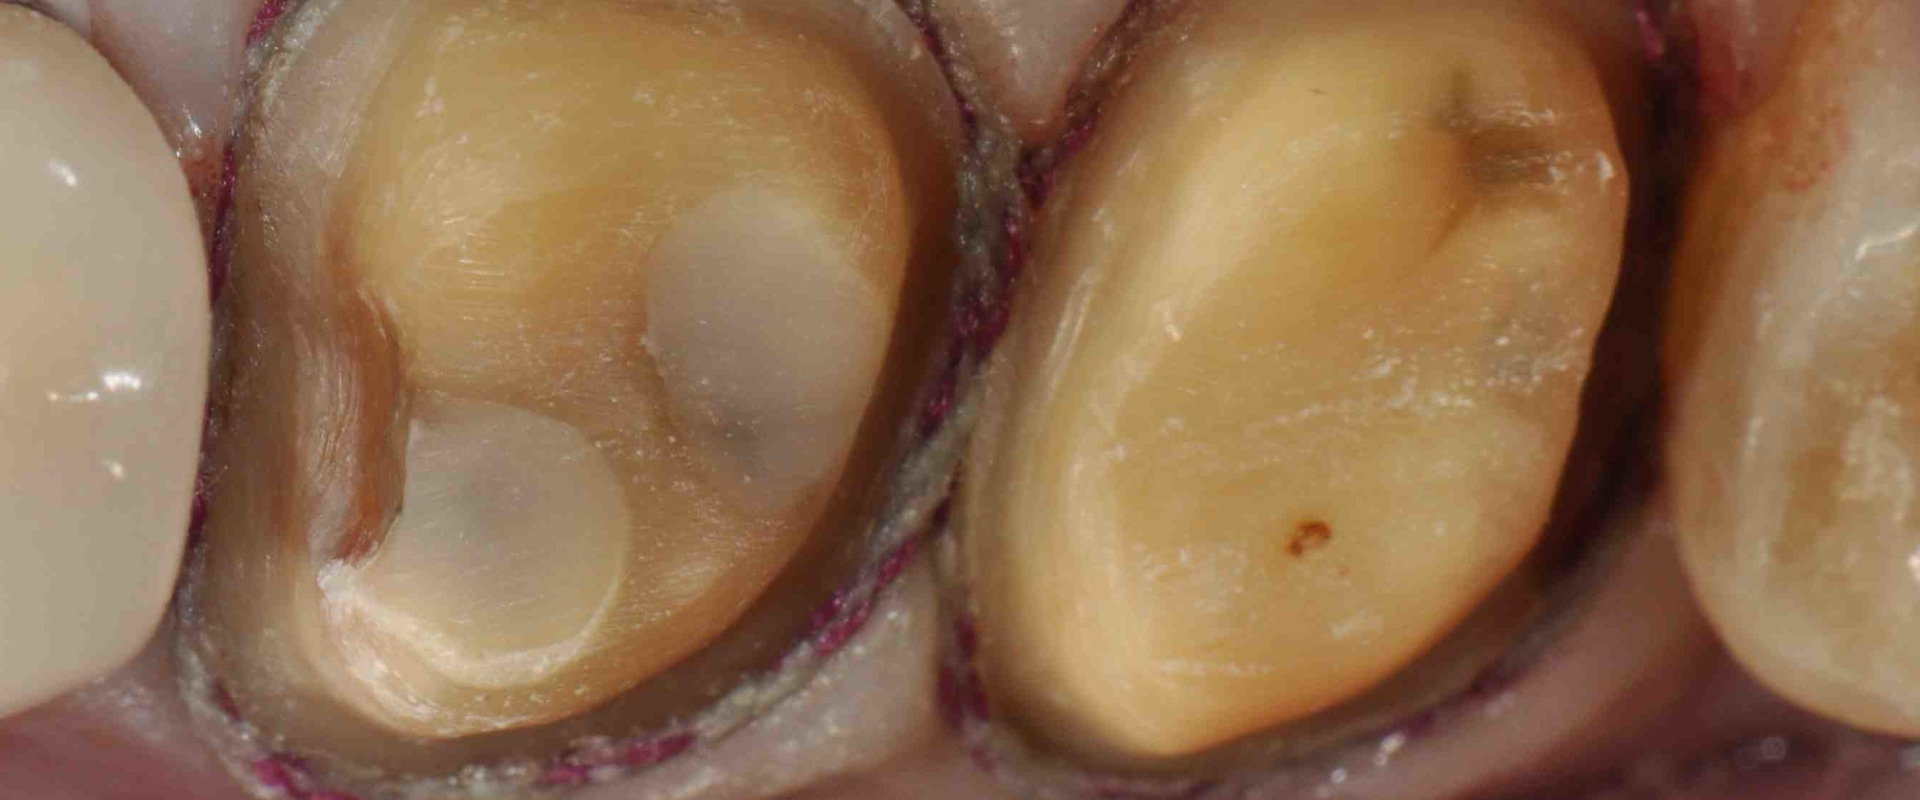 Can an Endodontist Perform a Root Canal Through a Crown?